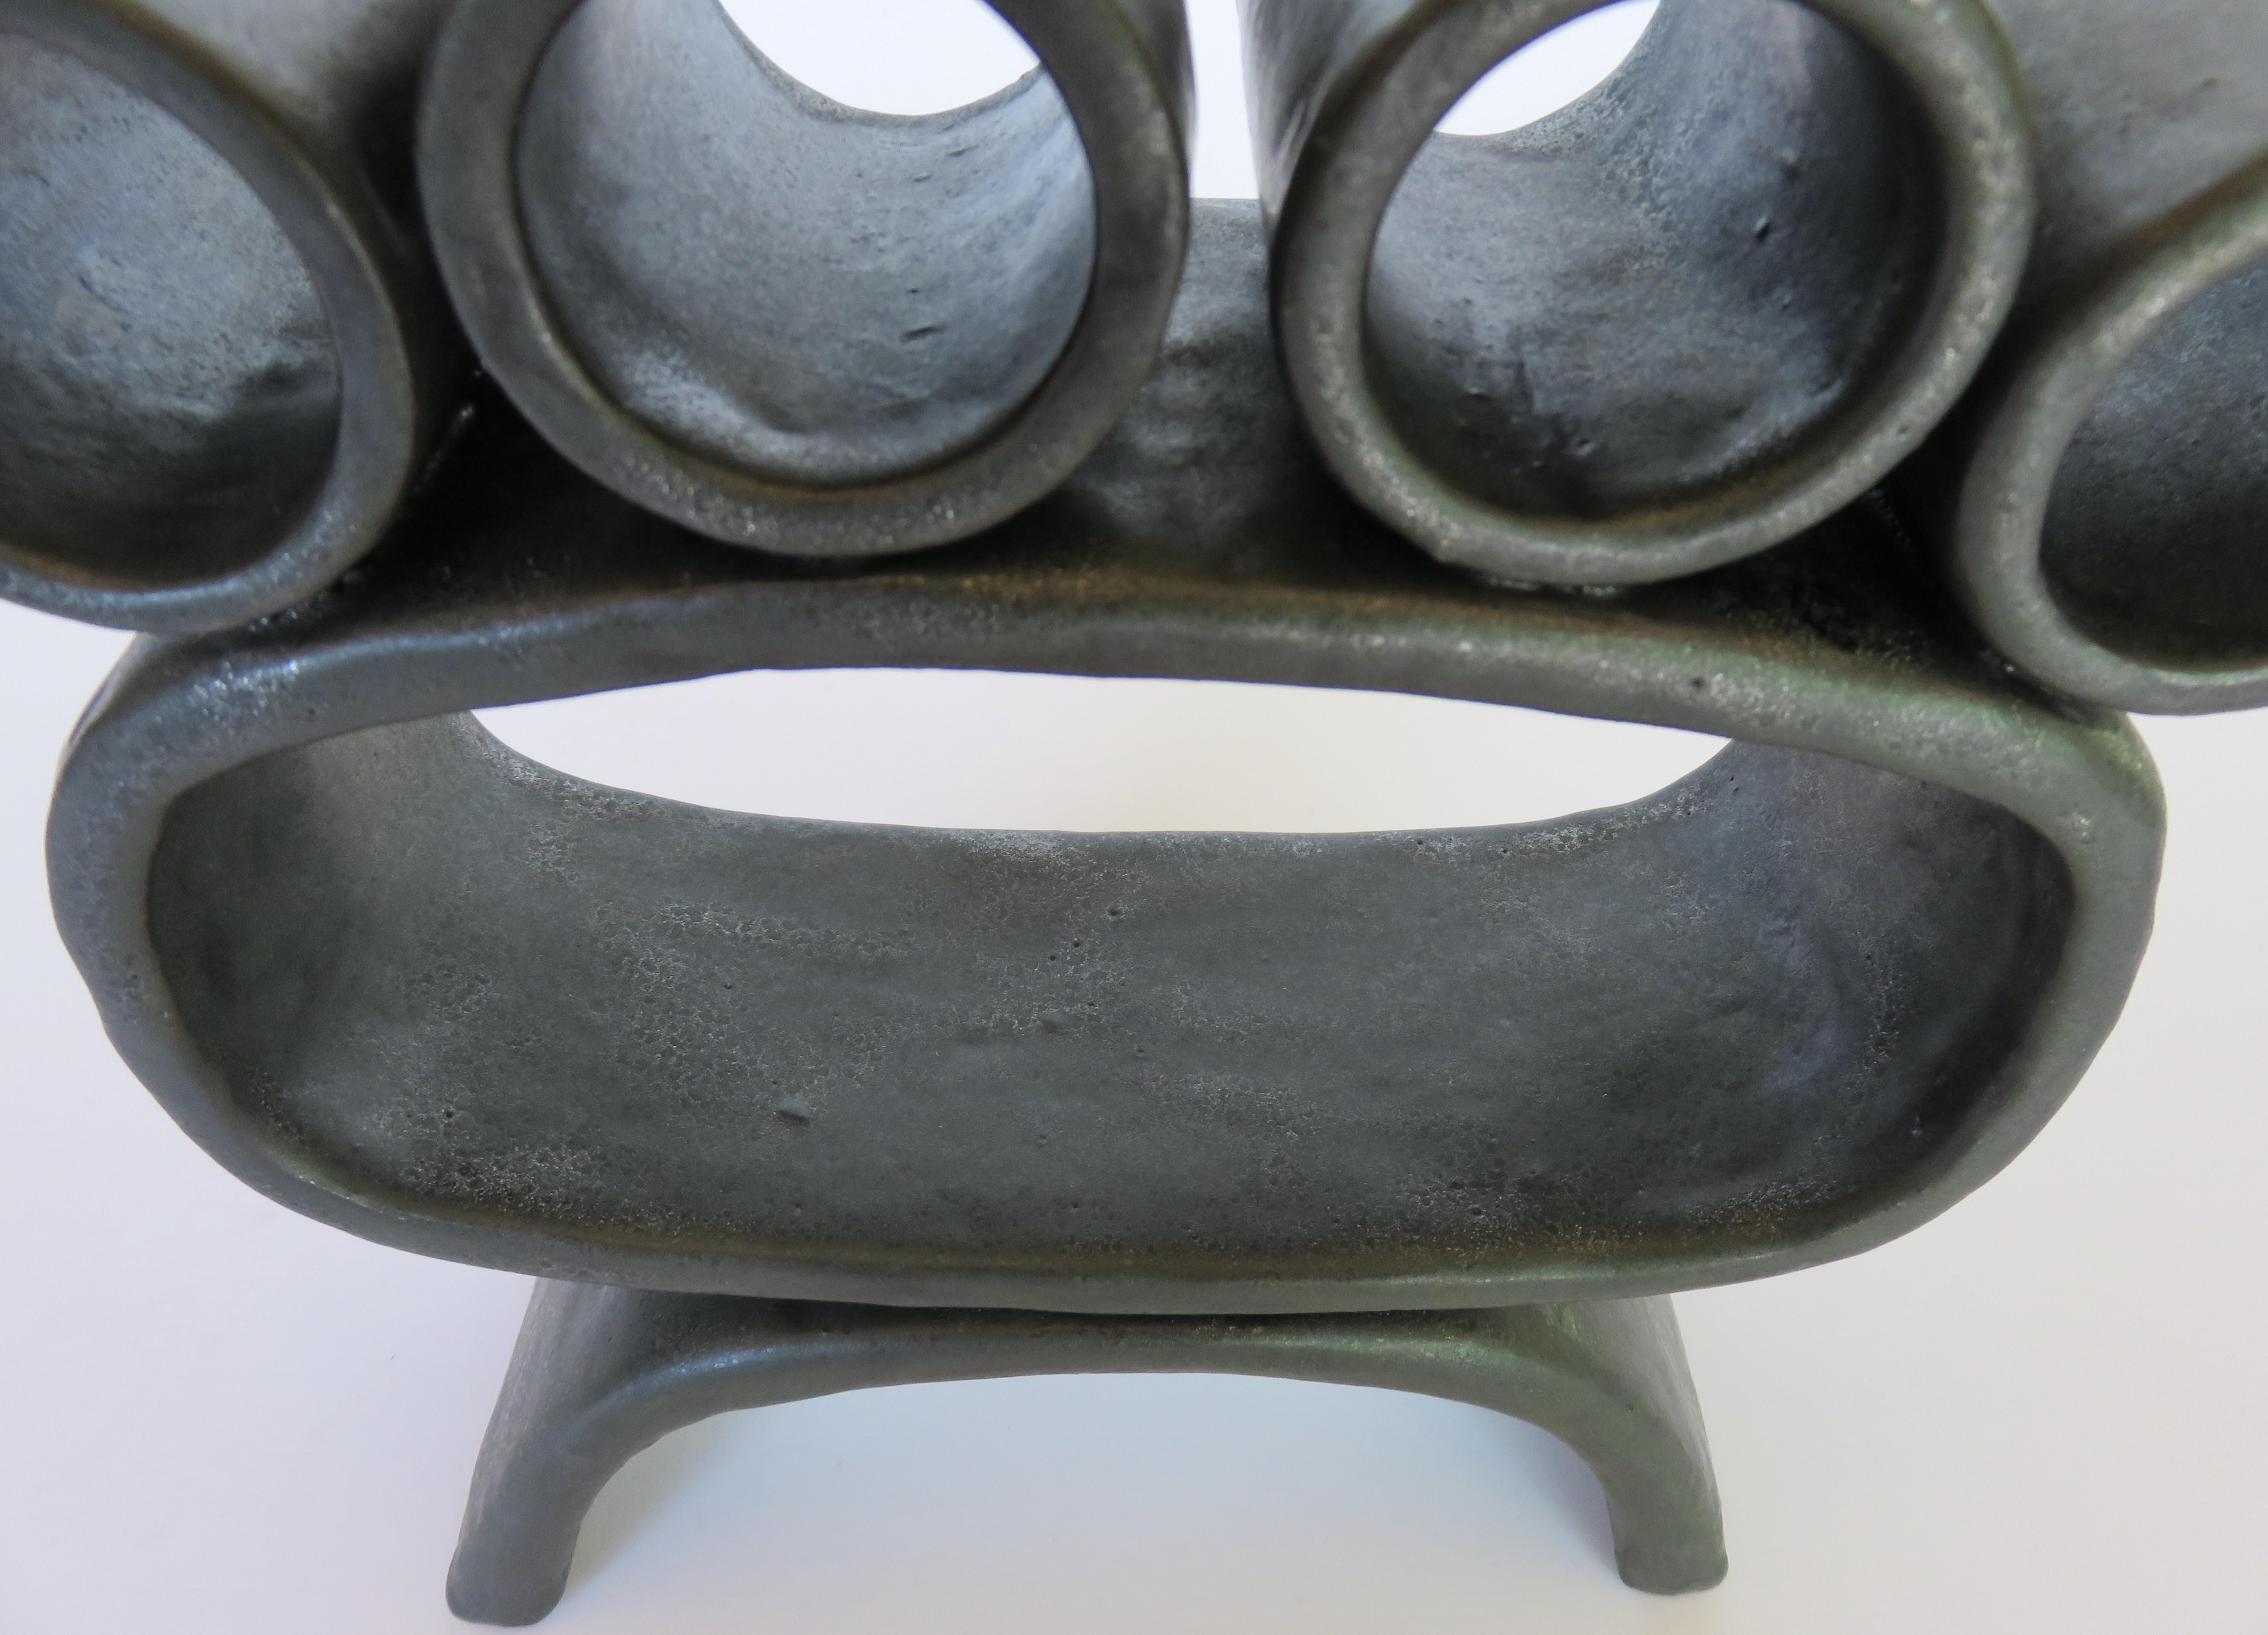 Metallic Black Hand-Built Ceramic Sculpture with Small Rings on Legs 3